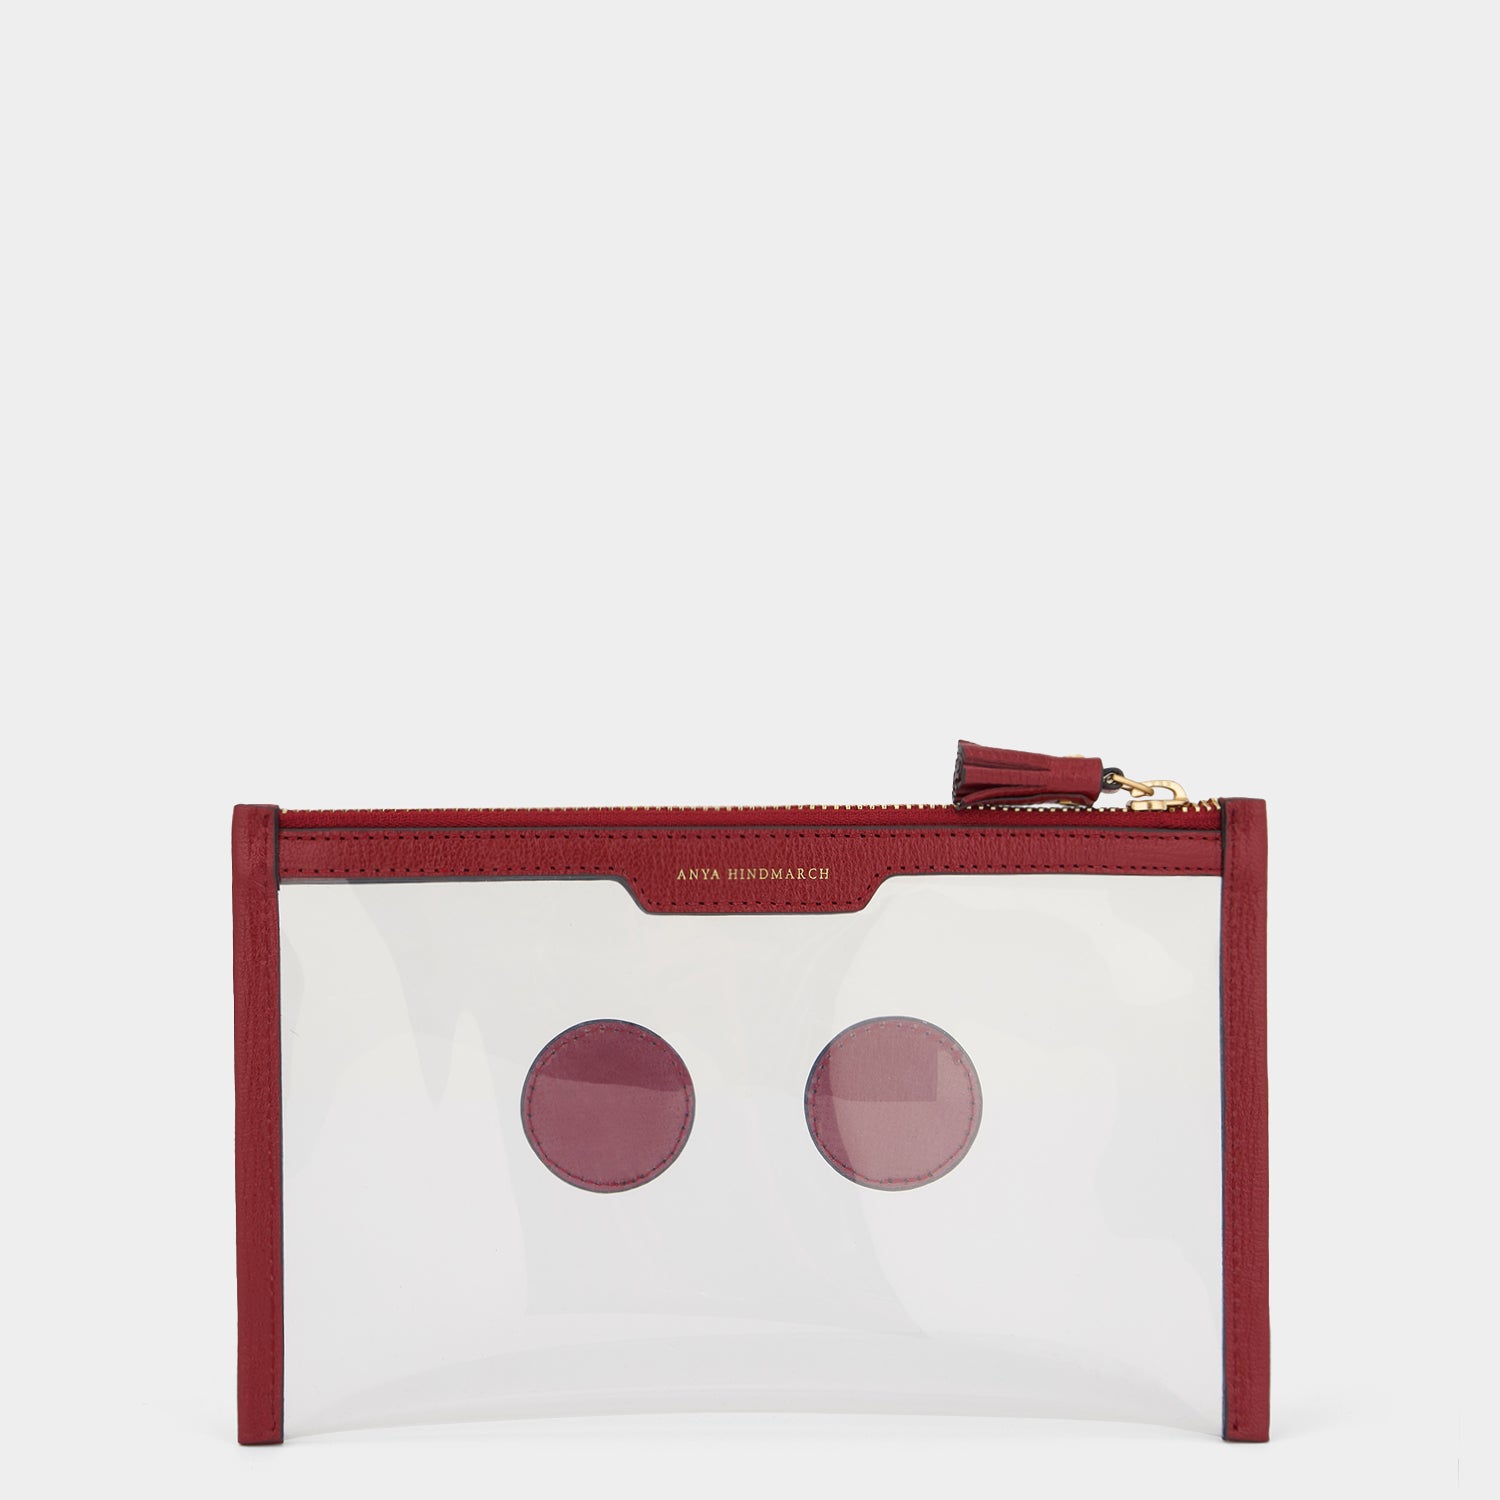 Eyes Keep Safe Pouch -

                  
                    Capra Leather in Vampire Red -
                  

                  Anya Hindmarch UK
